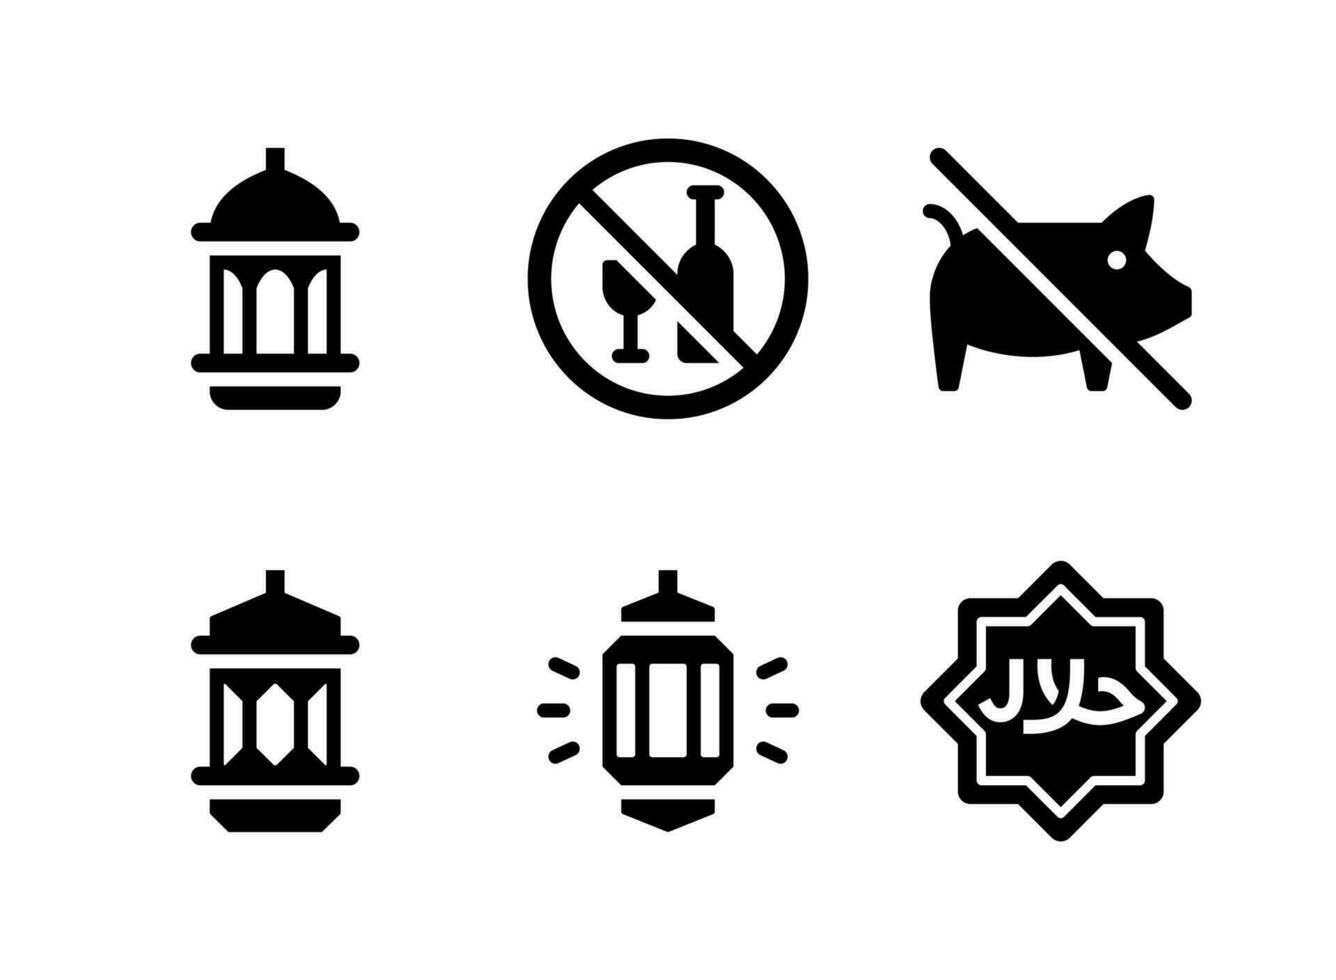 Simple Set of Ramadan Related Vector Solid Icons. Contains Icons as Lantern, No Drinking, Halal Label and more.